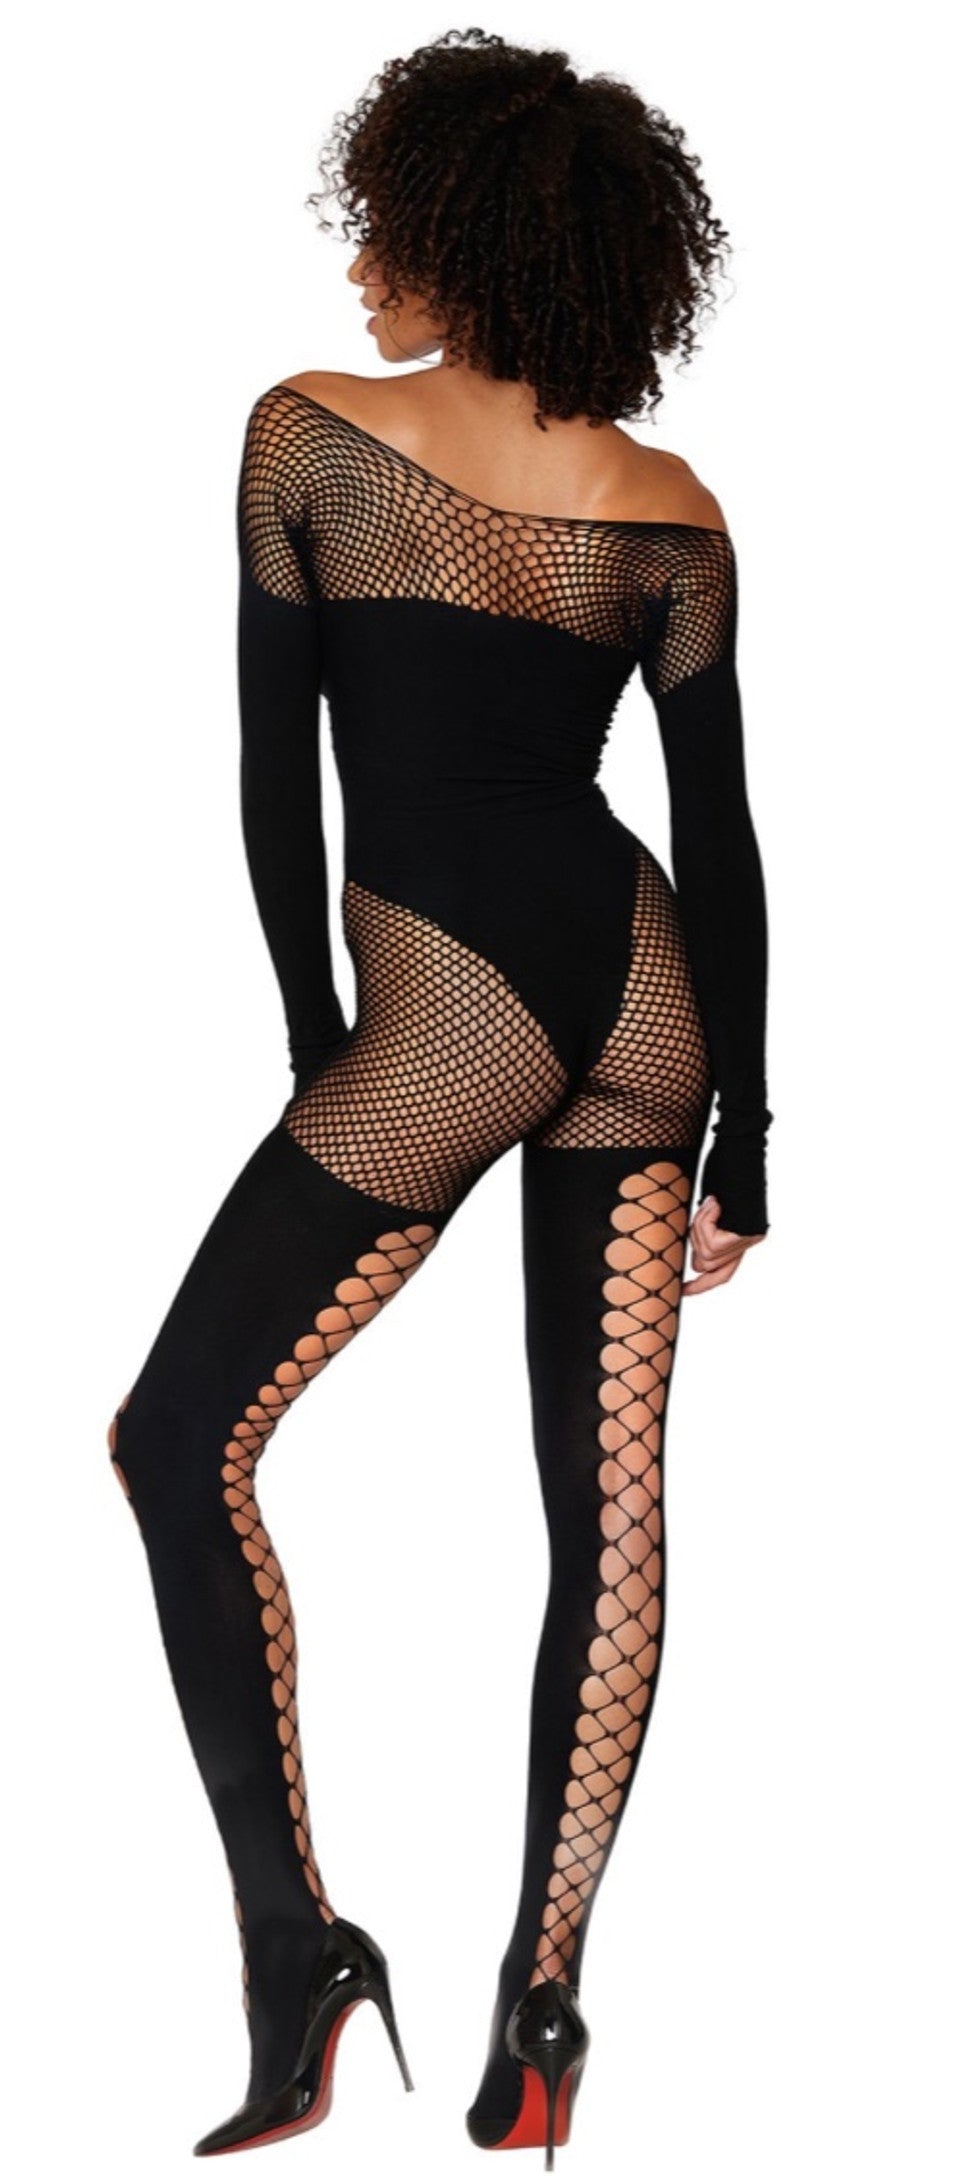 Bodystocking with fishnet